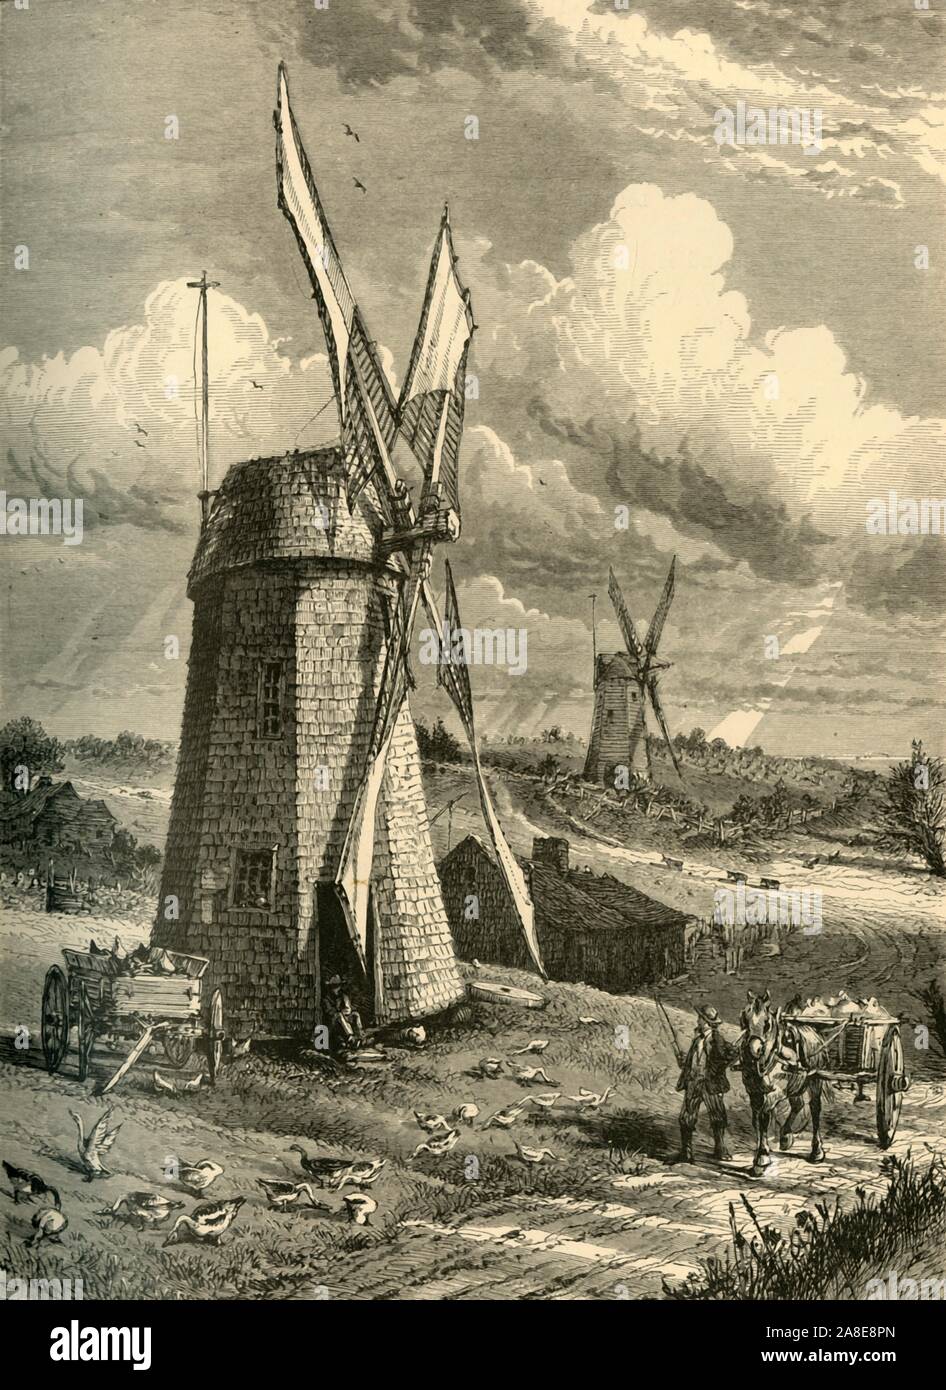 'Grist Wind-Mills at East Hampton', 1872. View of gristmills (used to grind cereal grain), in East Hampton, New York State, USA. From &quot;Picturesque America; or, The Land We Live In, A Delineation by Pen and Pencil of the Mountains, Rivers, Lakes...with Illustrations on Steel and Wood by Eminent American Artists&quot; Vol. I, edited by William Cullen Bryant. [D. Appleton and Company, New York, 1872] Stock Photo